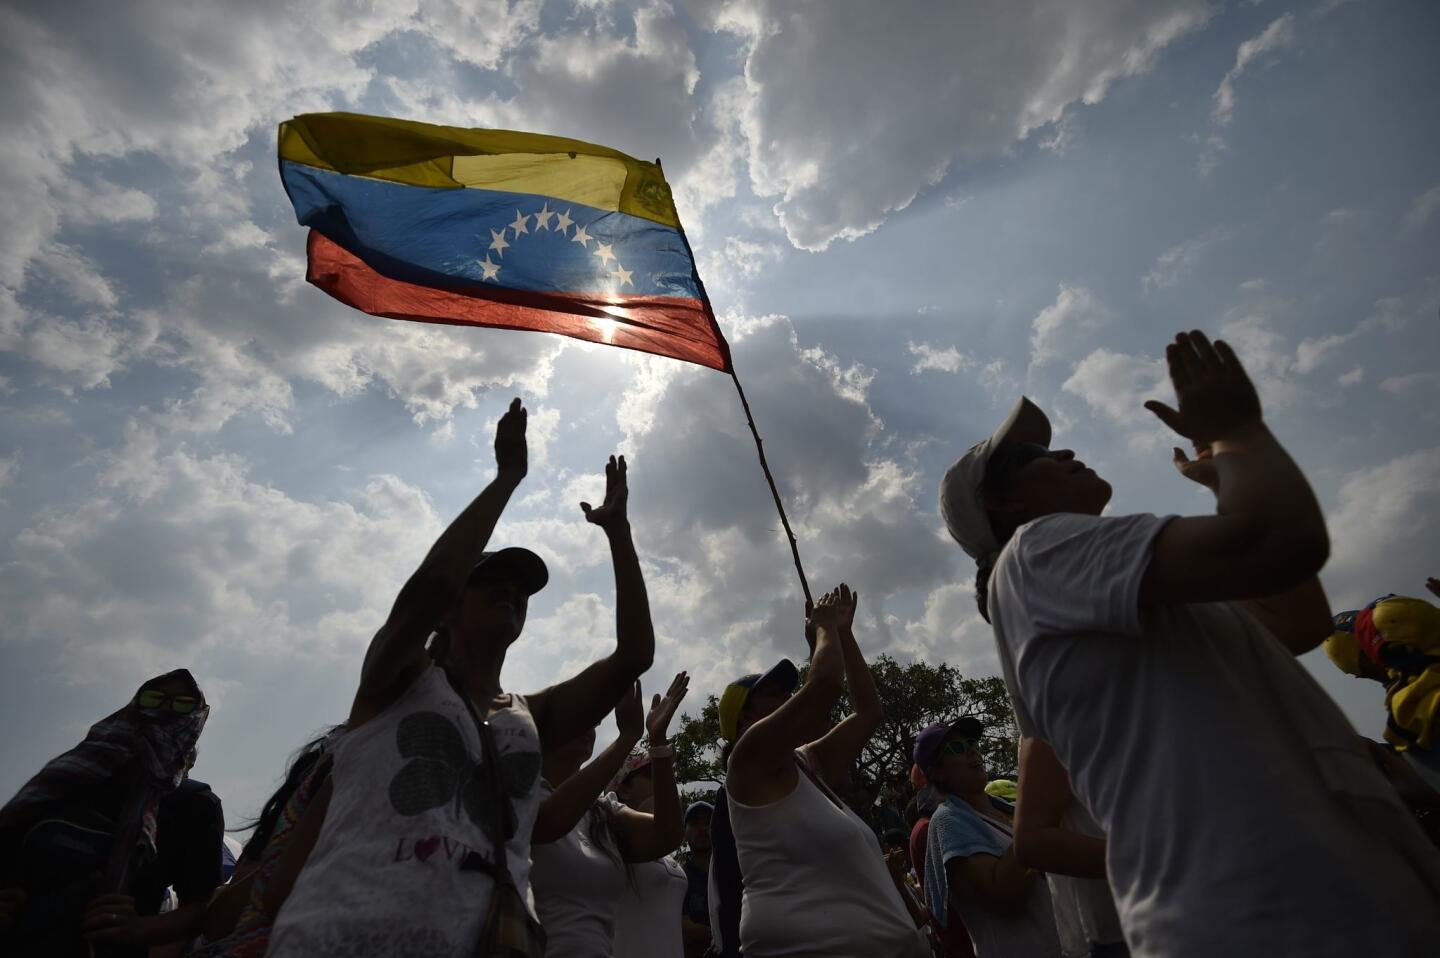 People attend "Venezuela Aid Live" concert, organized to raise money for the Venezuelan relief effort at Tienditas International Bridge in Cucuta, Colombia, on February 22, 2019. - Venezuela's political tug-of-war morphs into a battle of the bands on Friday, with dueling government and opposition pop concerts ahead of a weekend showdown over the entry of badly needed food and medical aid. (Photo by Luis ROBAYO / AFP)LUIS ROBAYO/AFP/Getty Images ** OUTS - ELSENT, FPG, CM - OUTS * NM, PH, VA if sourced by CT, LA or MoD **